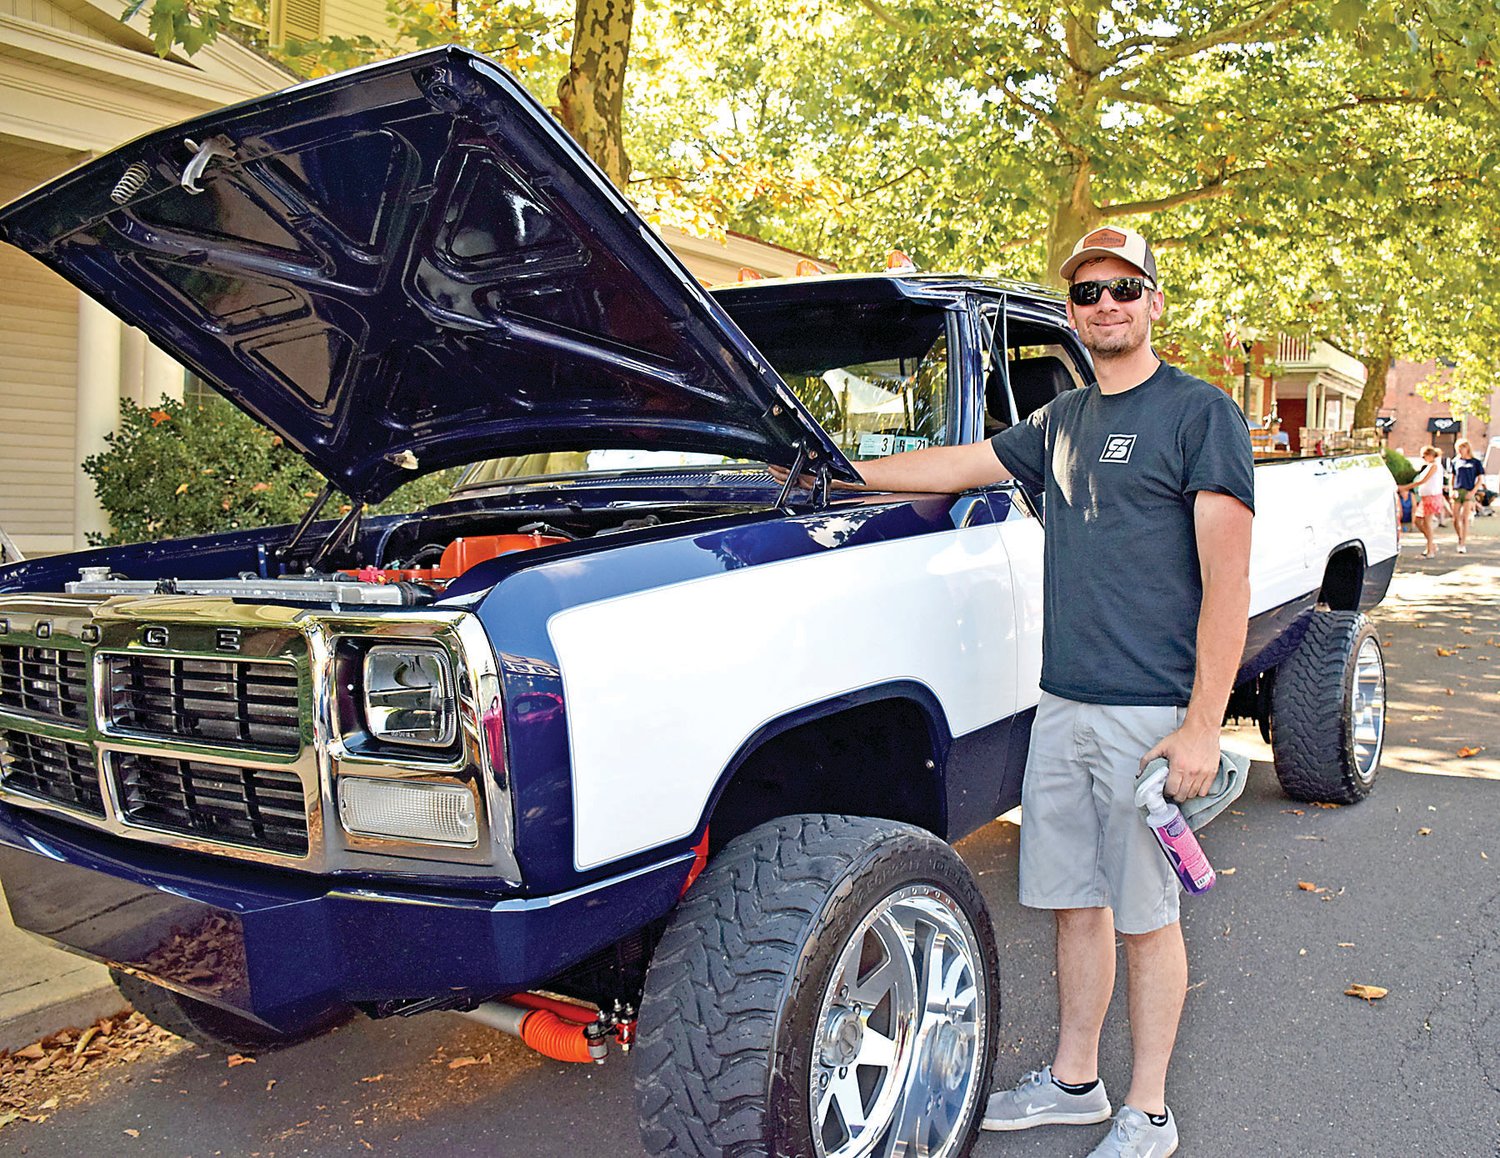 Shaun Sparks of Doylestown with his Dodge ‘93 W250.